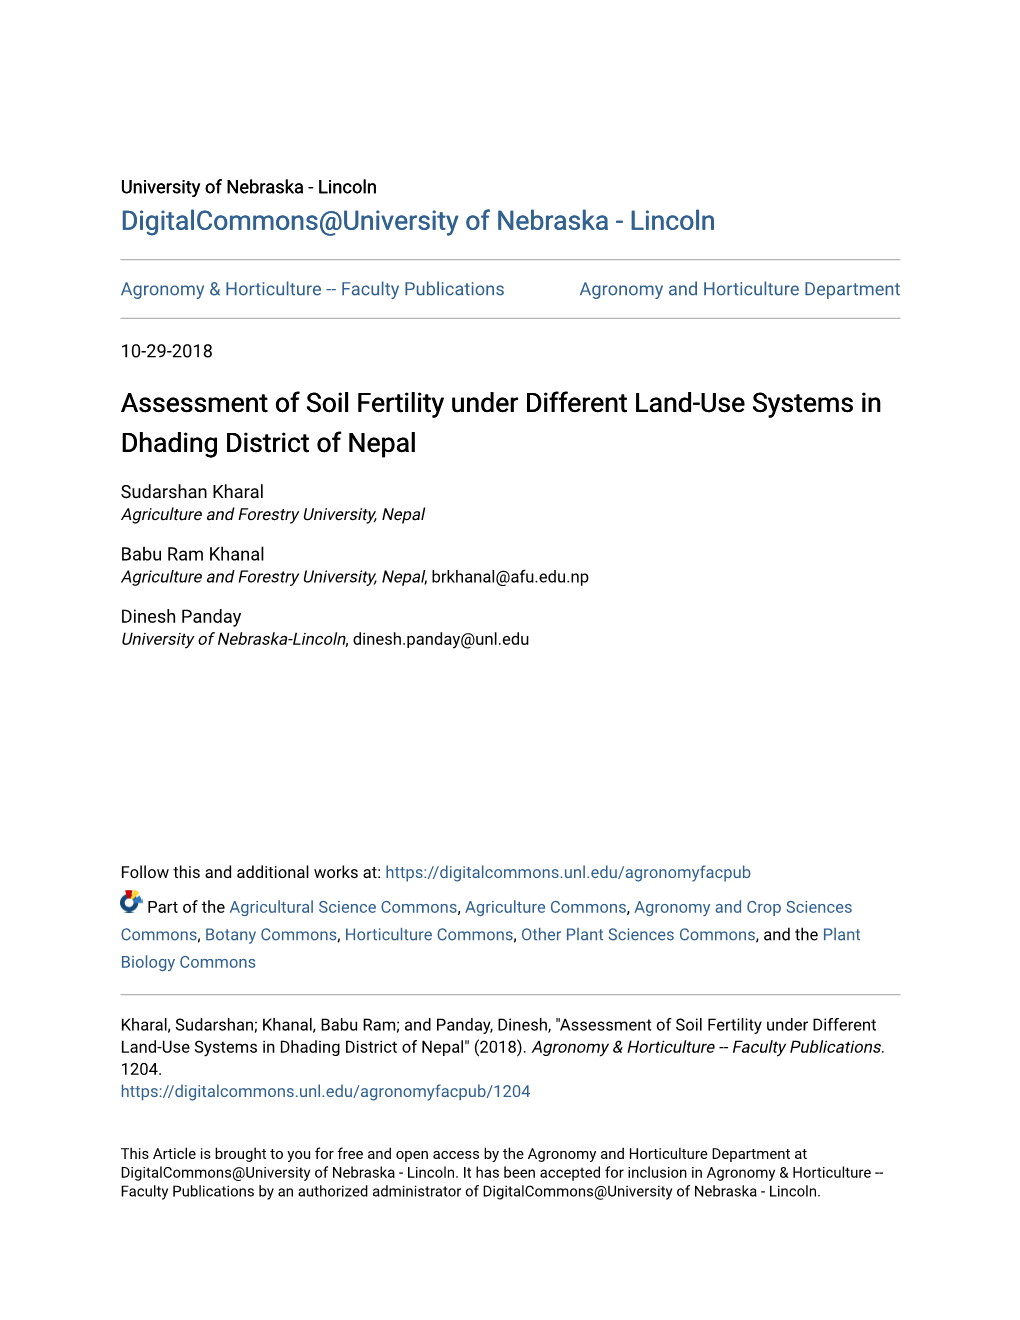 Assessment of Soil Fertility Under Different Land-Use Systems in Dhading District of Nepal